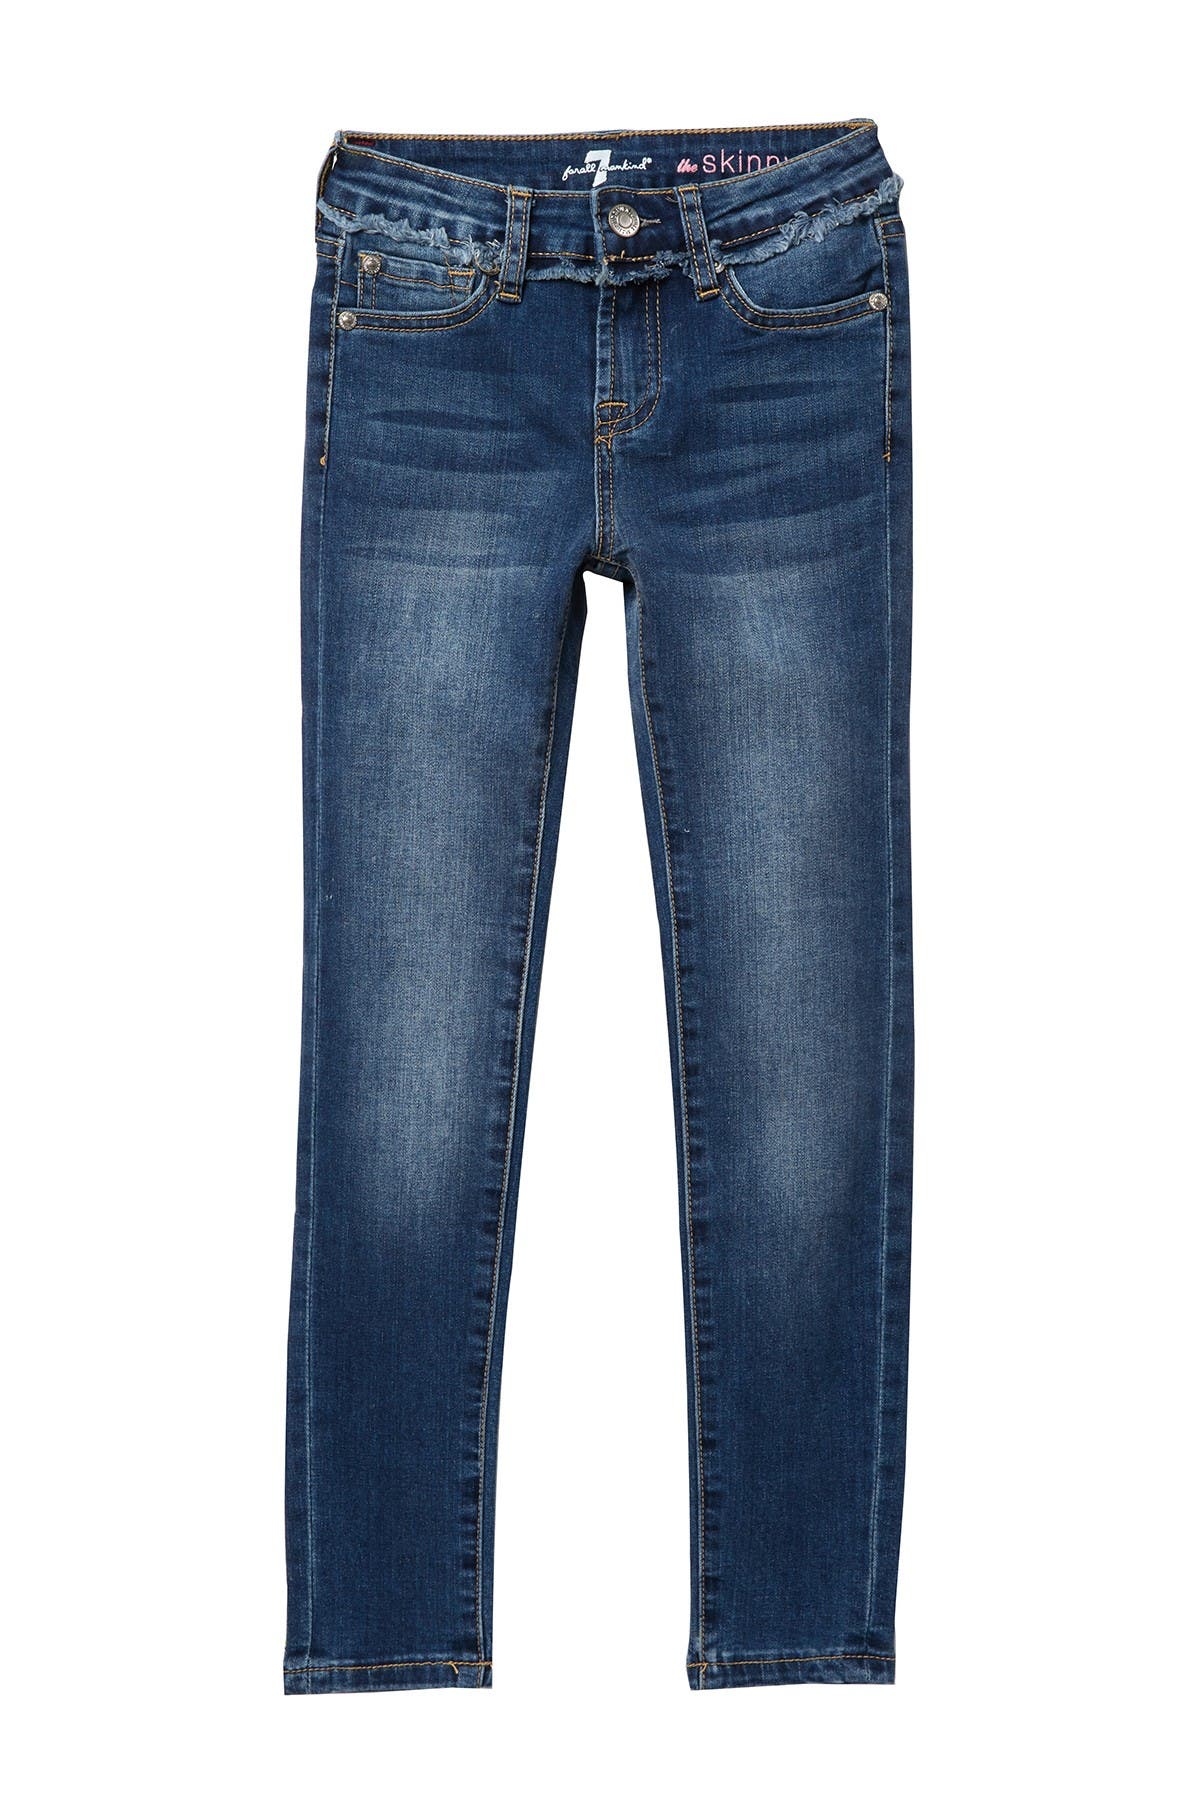 7 for all mankind long inseam